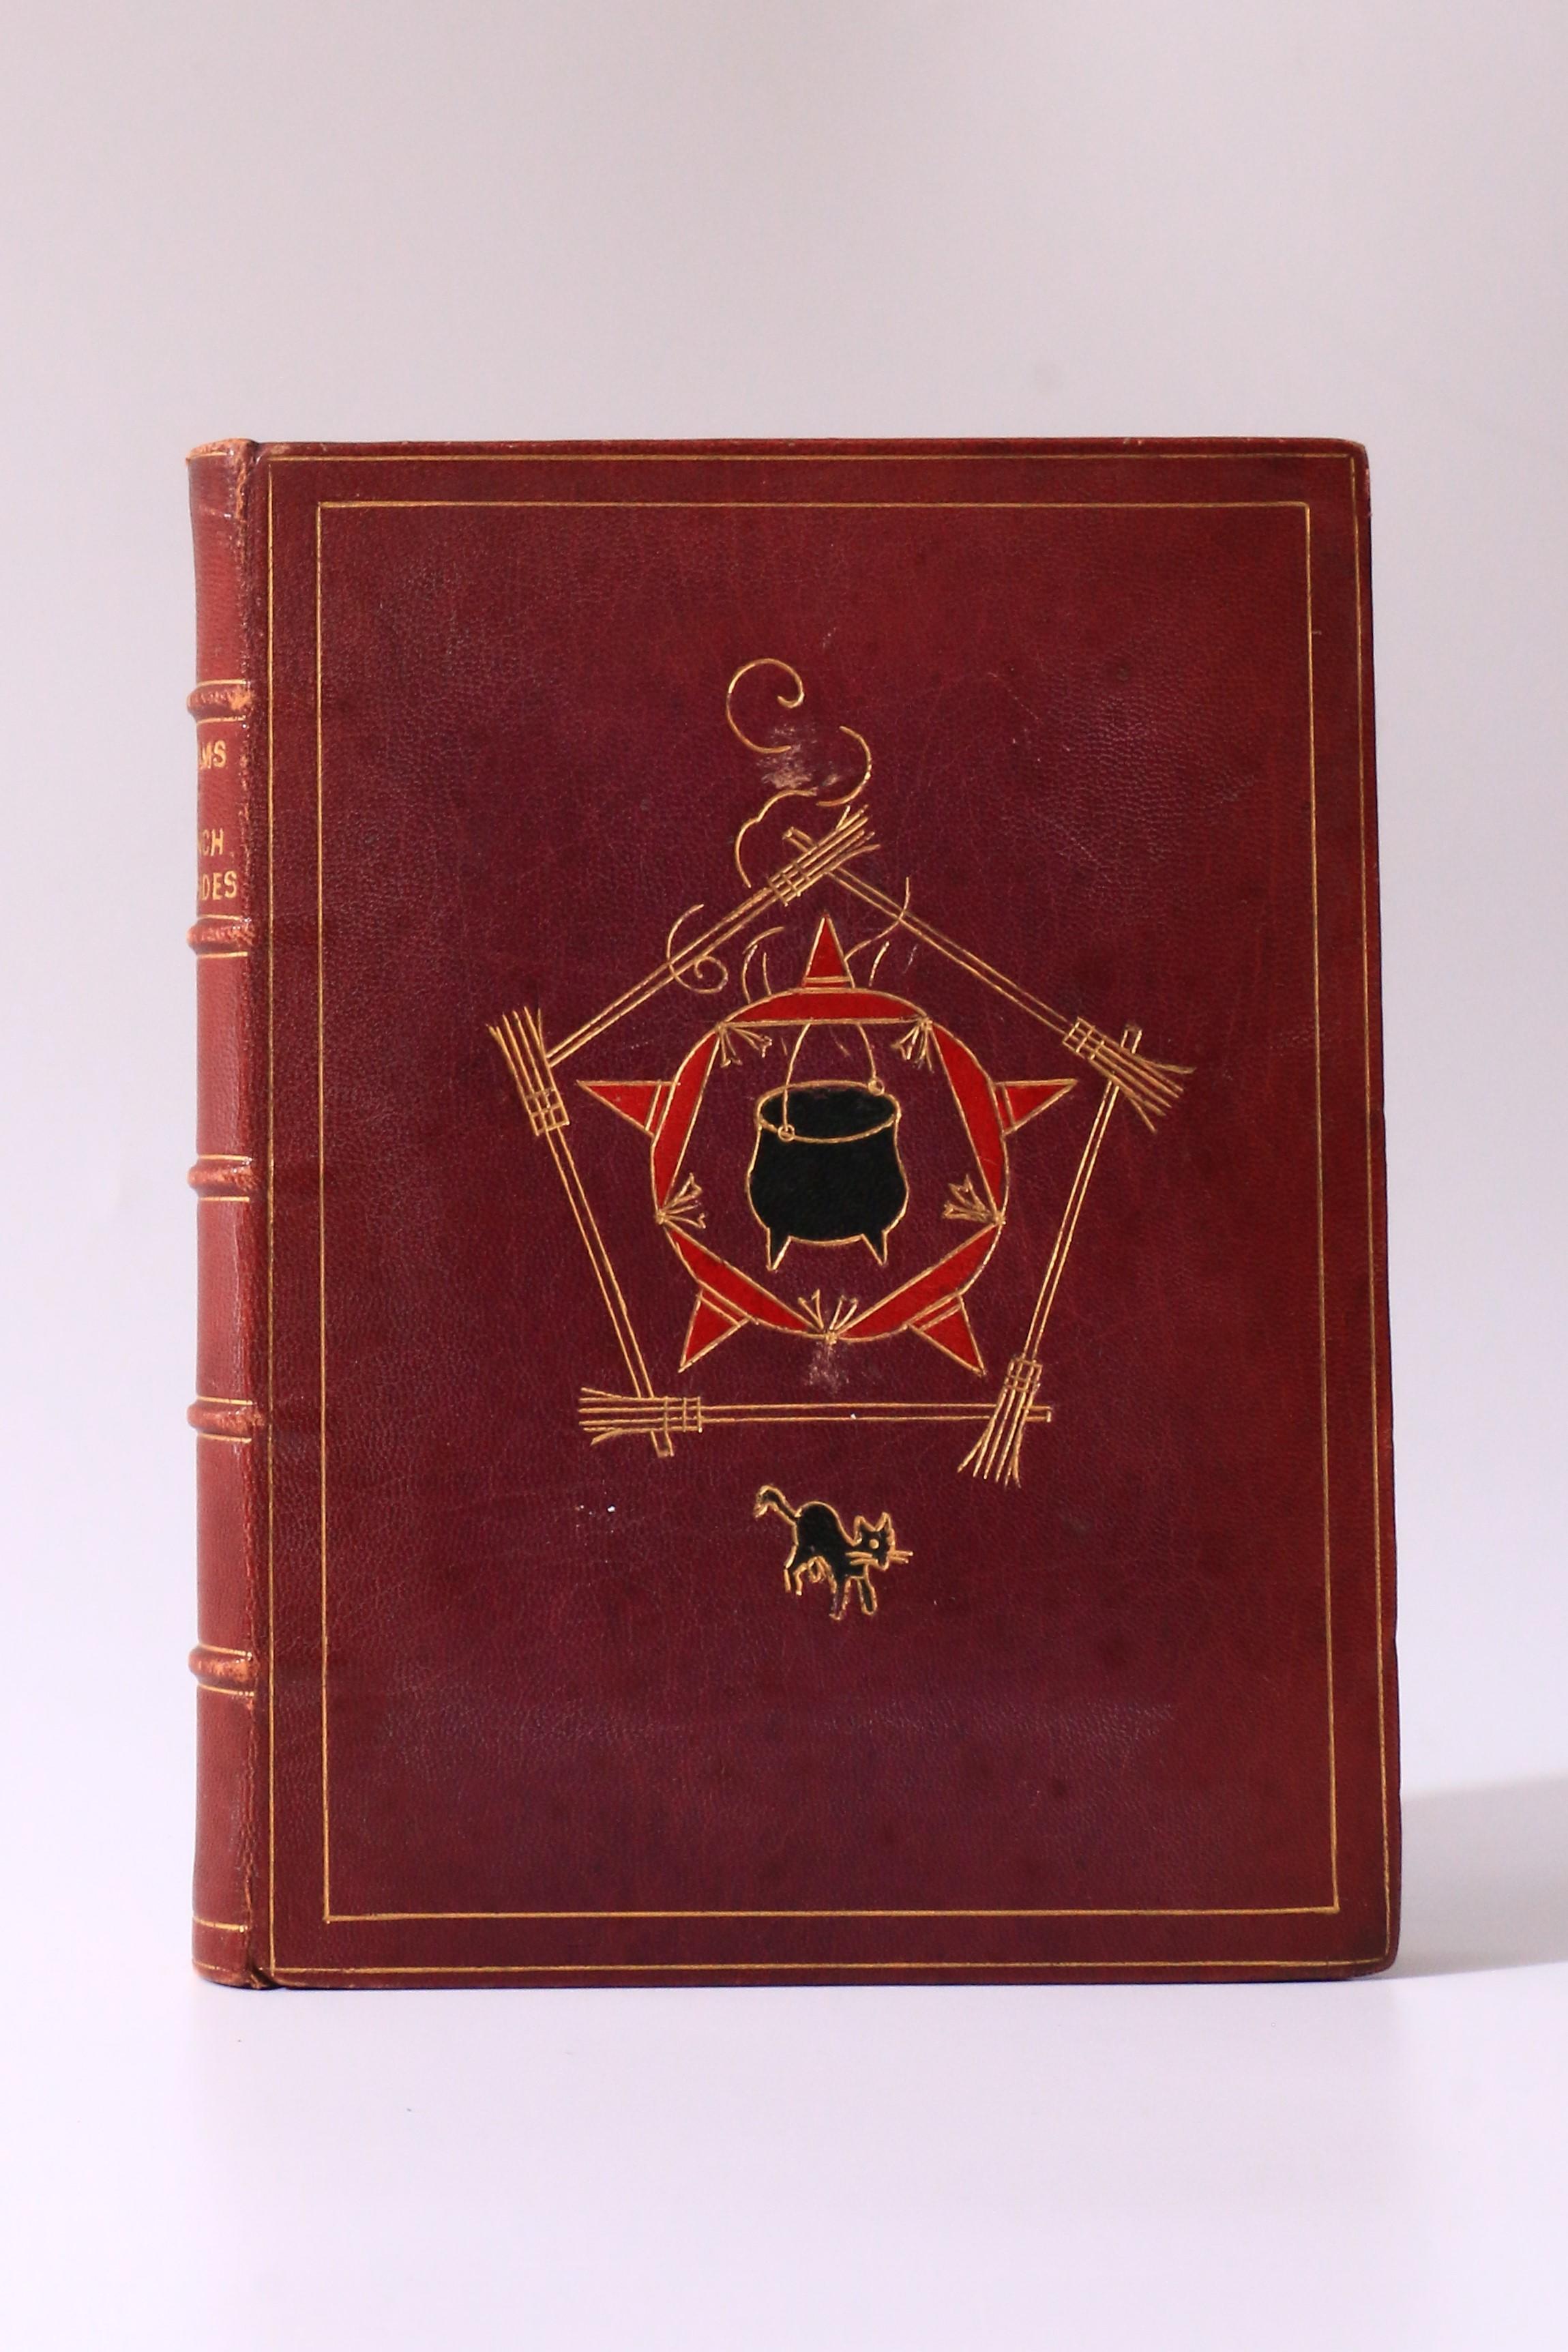 Richard Leander - Dreams by French Firesides - Adam & Charles Black, 1890, First Edition.